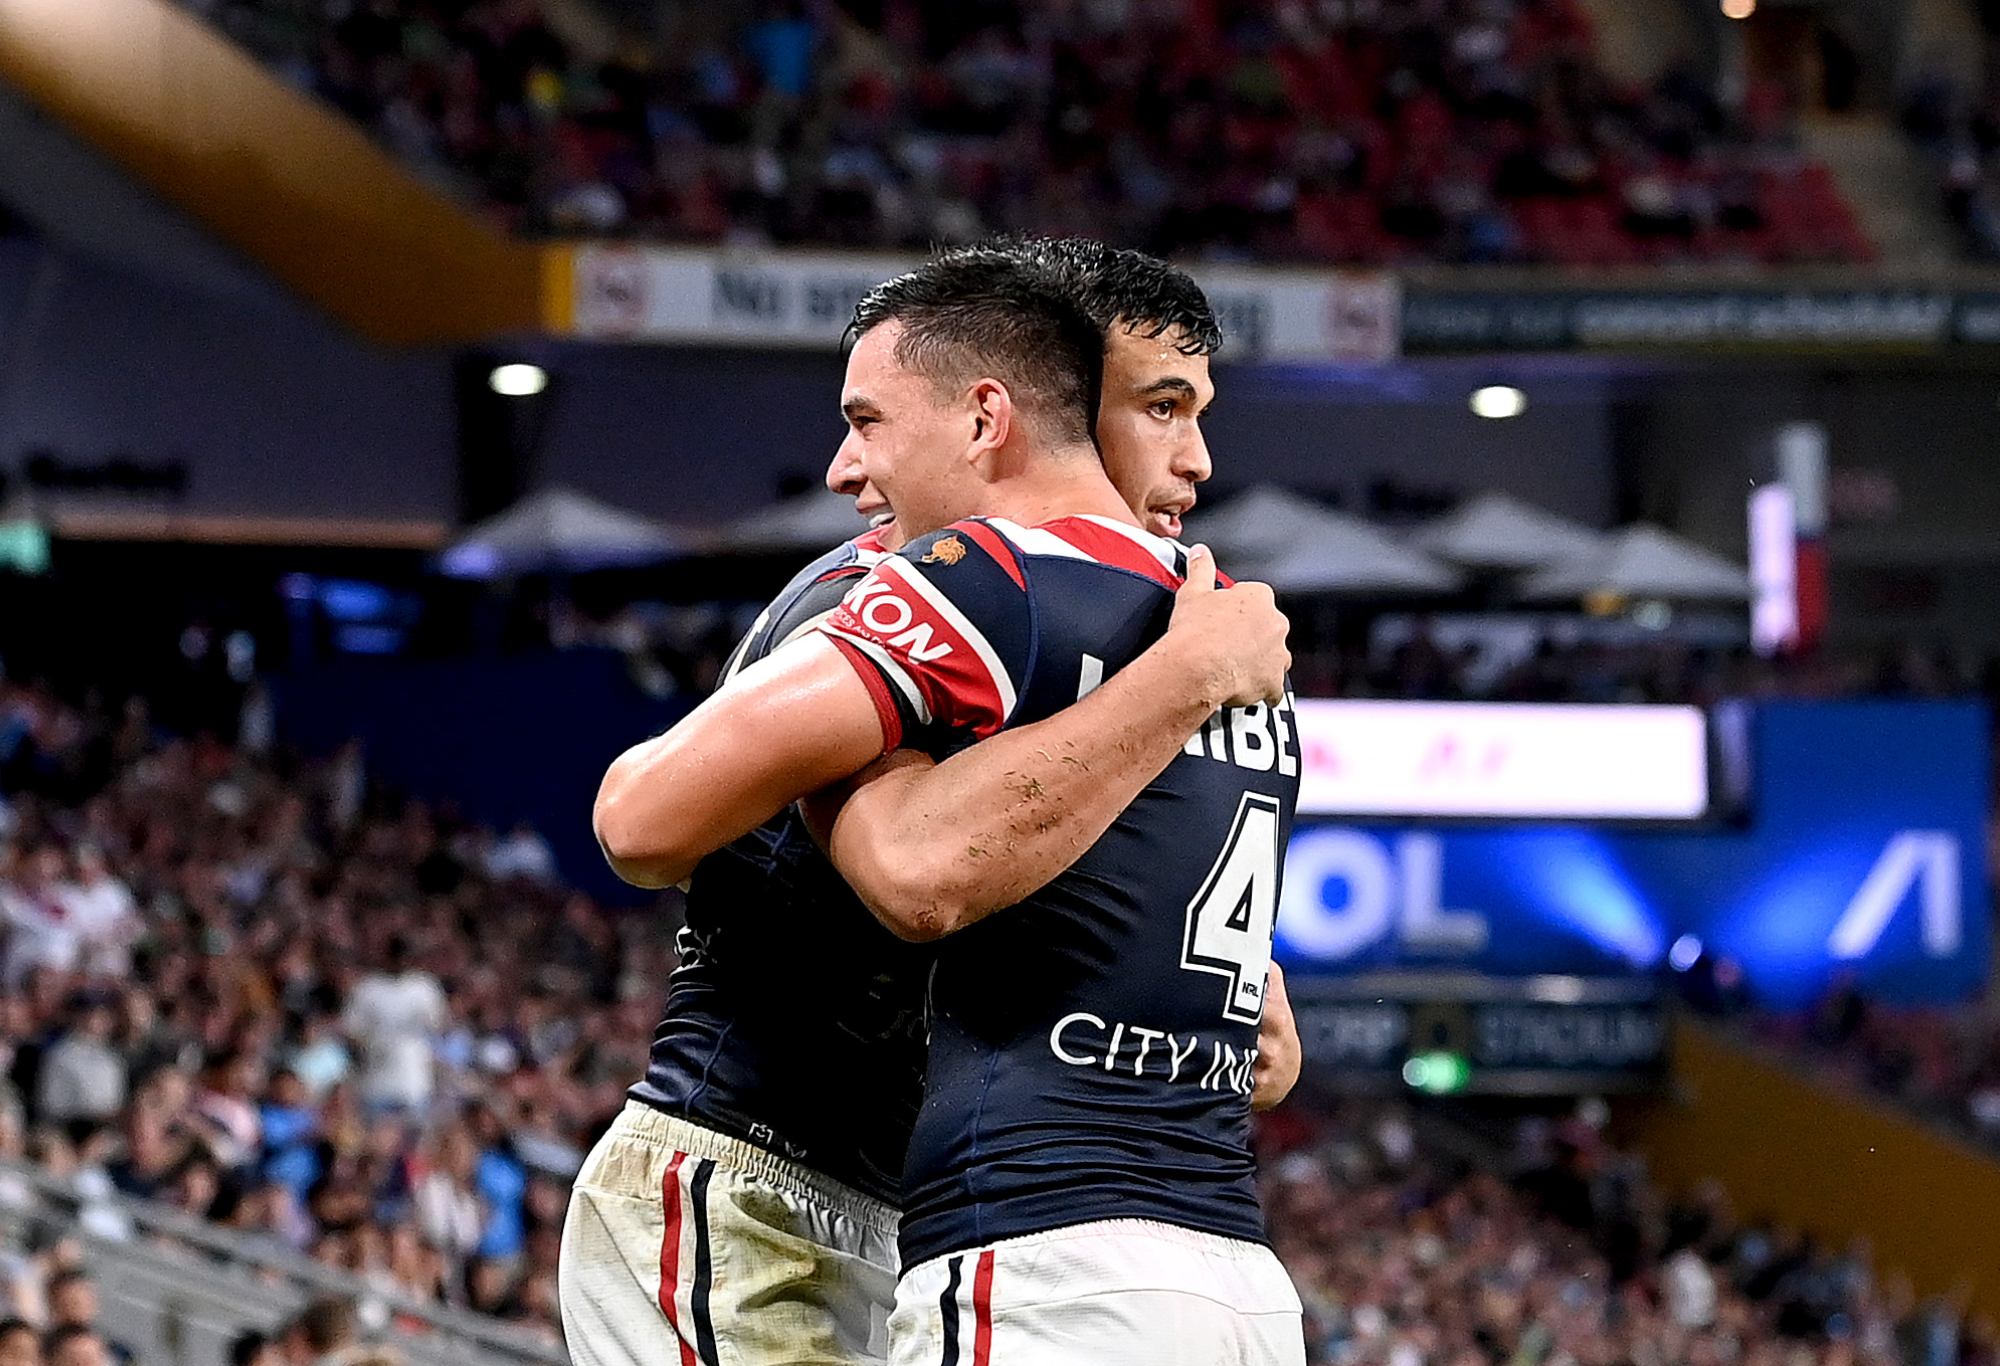 BRISBANE, AUSTRALIA - MAY 15: Joseph Suaalii of the Roosters celebrates with team mate Joseph Manu after scoring a try during the NRL Round 10 match between the Sydney Roosters and the Parramatta Eels at Suncorp Stadium on May 15, 2022 in Brisbane, Australia.  (Photo by Bradley Kanaris/Getty Images)